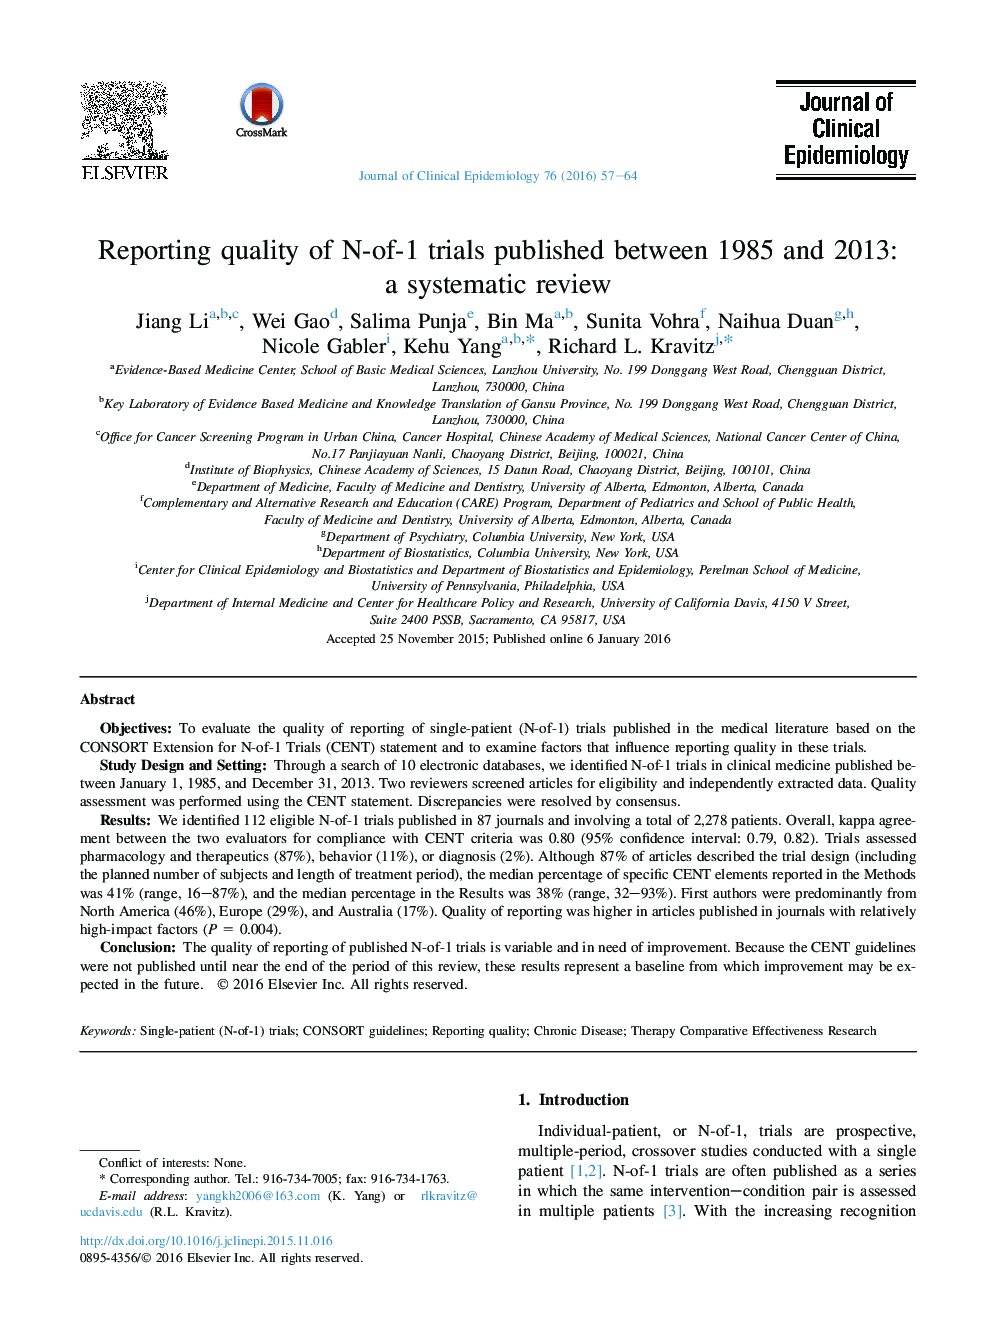 Reporting quality of N-of-1 trials published between 1985 and 2013: a systematic review